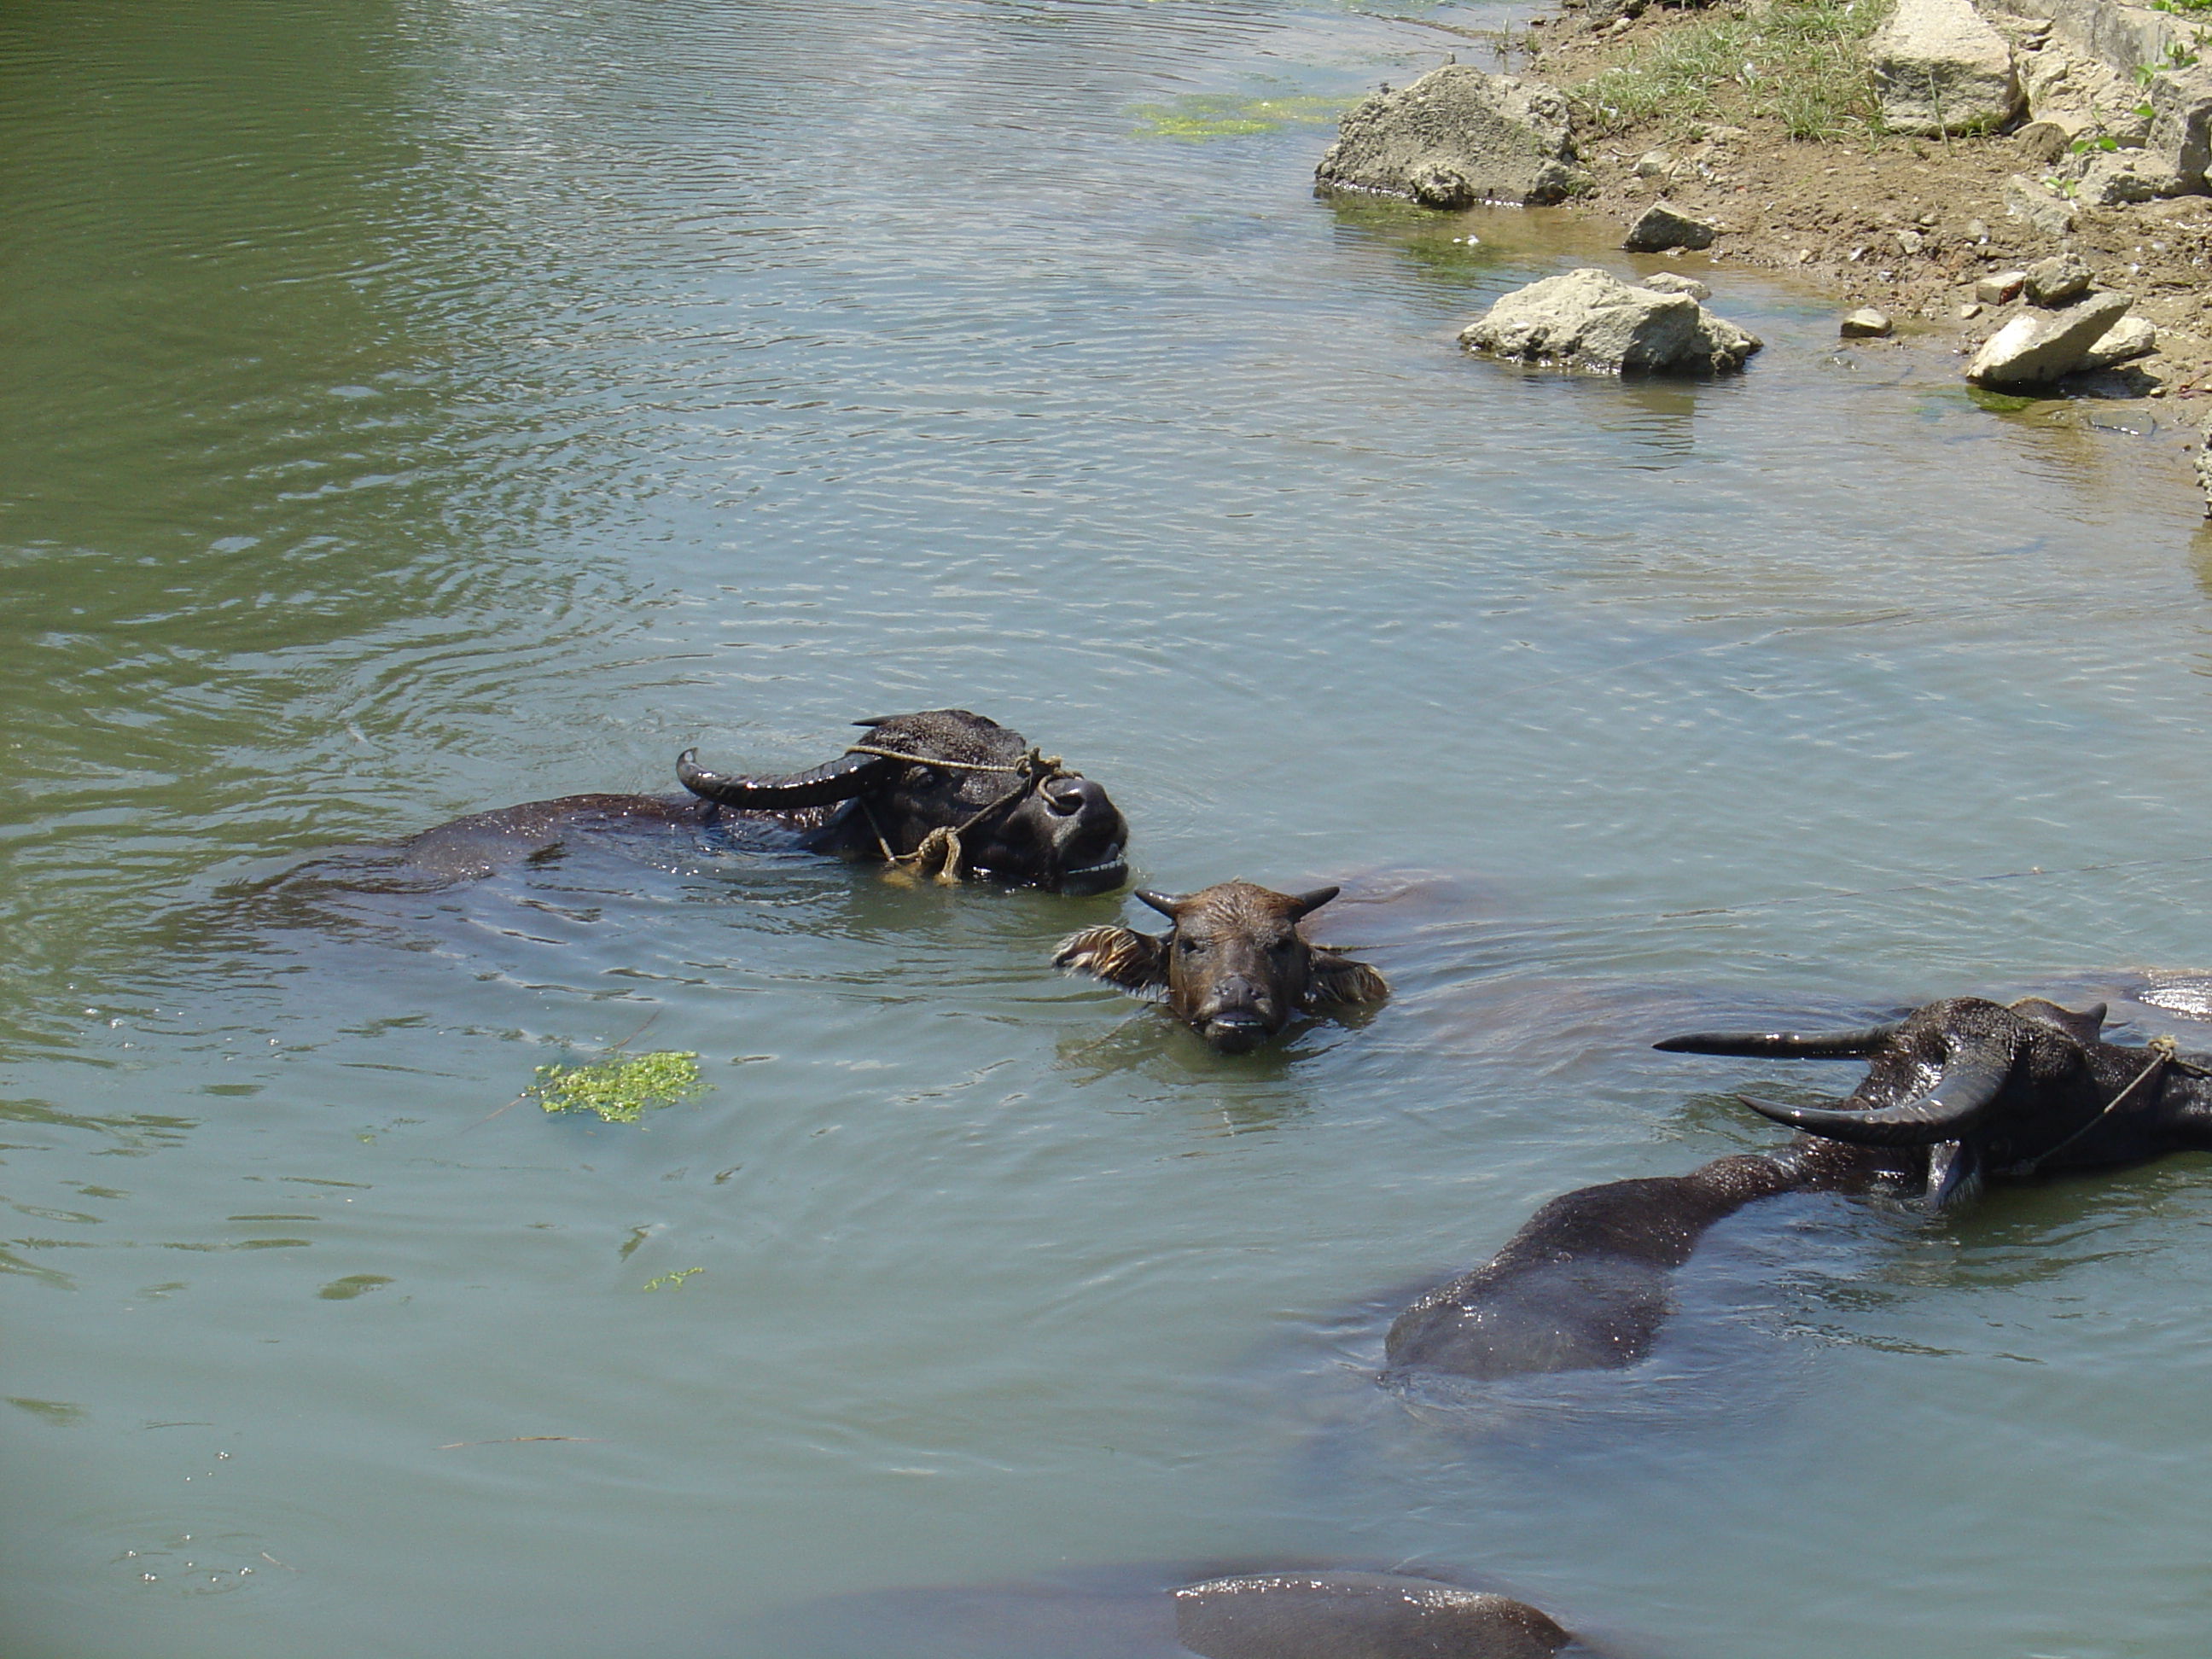 Water buffaloes cooling down in the river. 